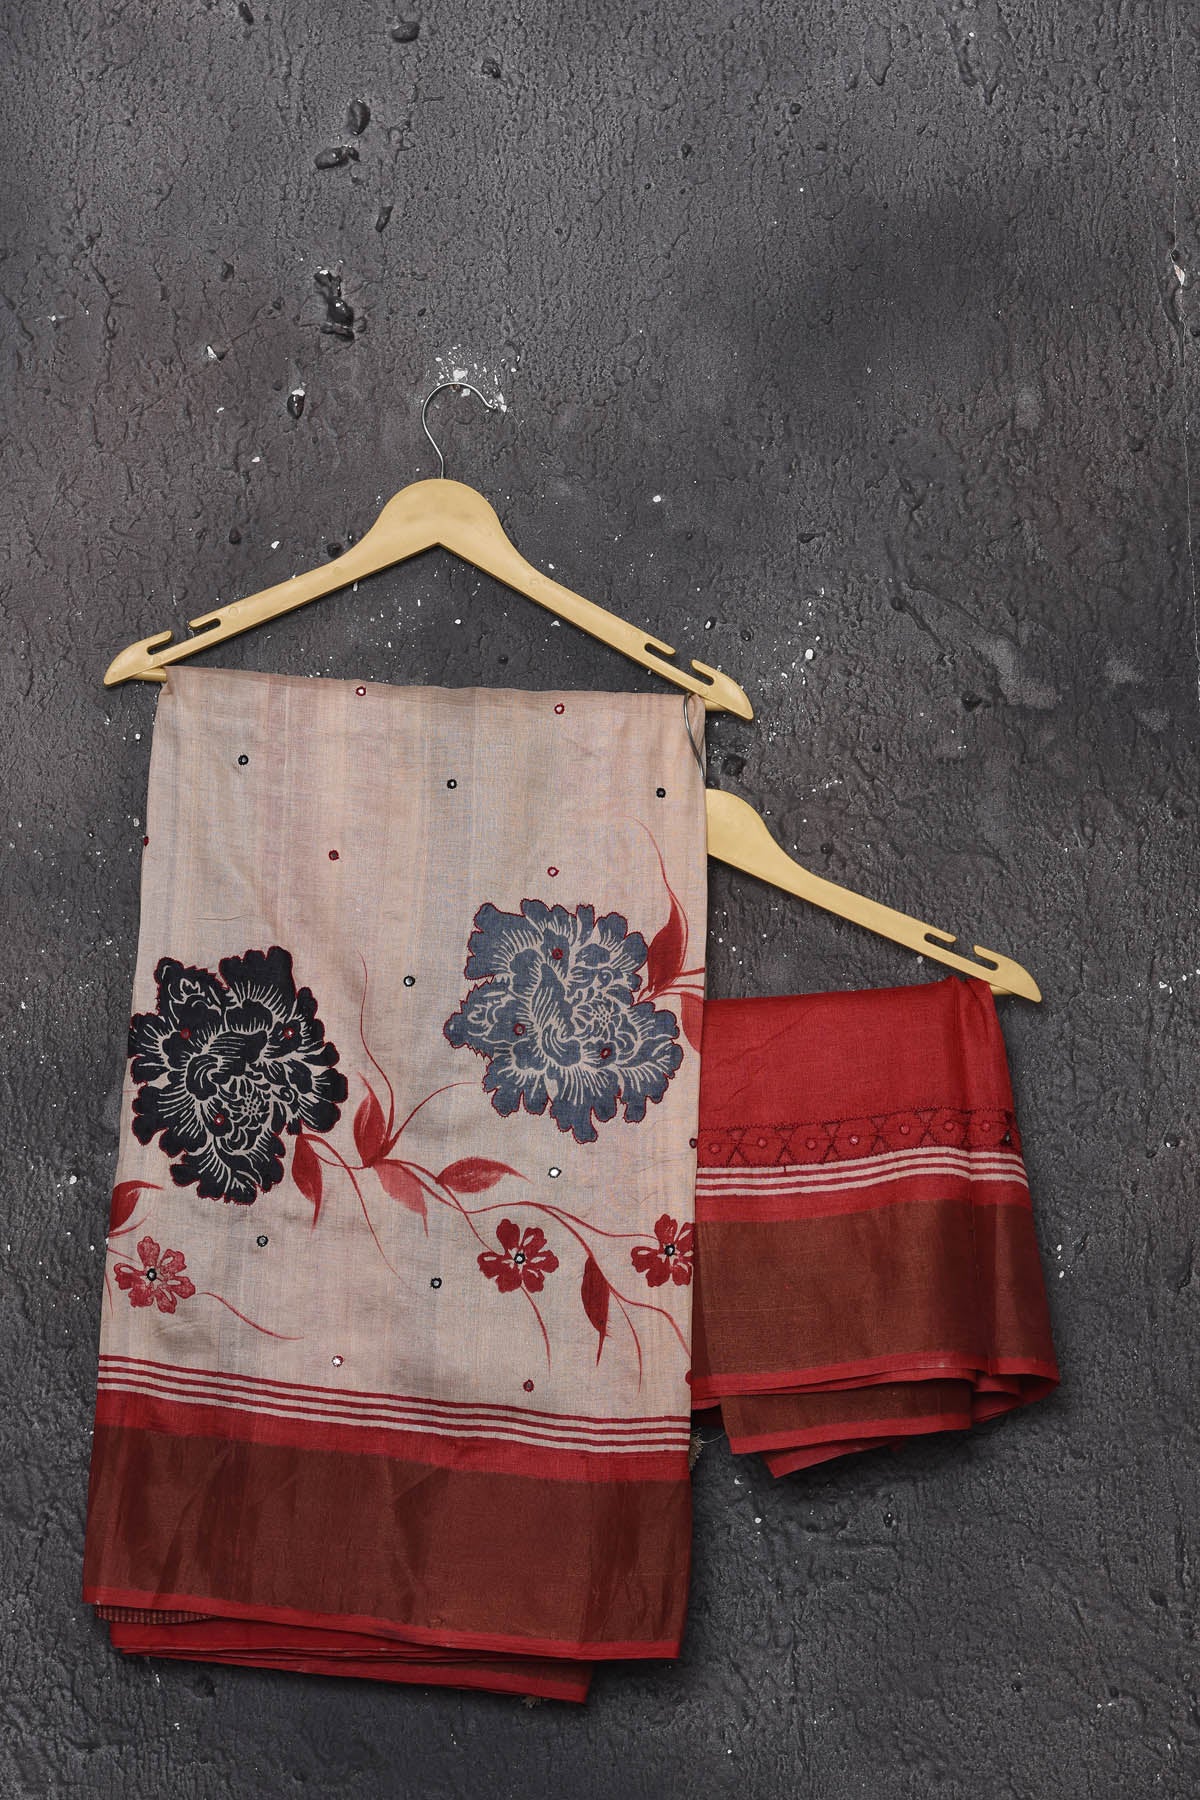 Buy this elegant offwhite-red pure tussar saree with floral embroidered hand cutwork border online in USA which is handcrafted from fine silk tussar fabric, this tie and dye saree brings out the nature of flow. You can pair this beautiful floral embroidered print saree with minimal jewellery for a casual day outfit. Add this pure tussar saree to your collection from Pure Elegance Indian fashion store in USA.-Unstitched blouse.